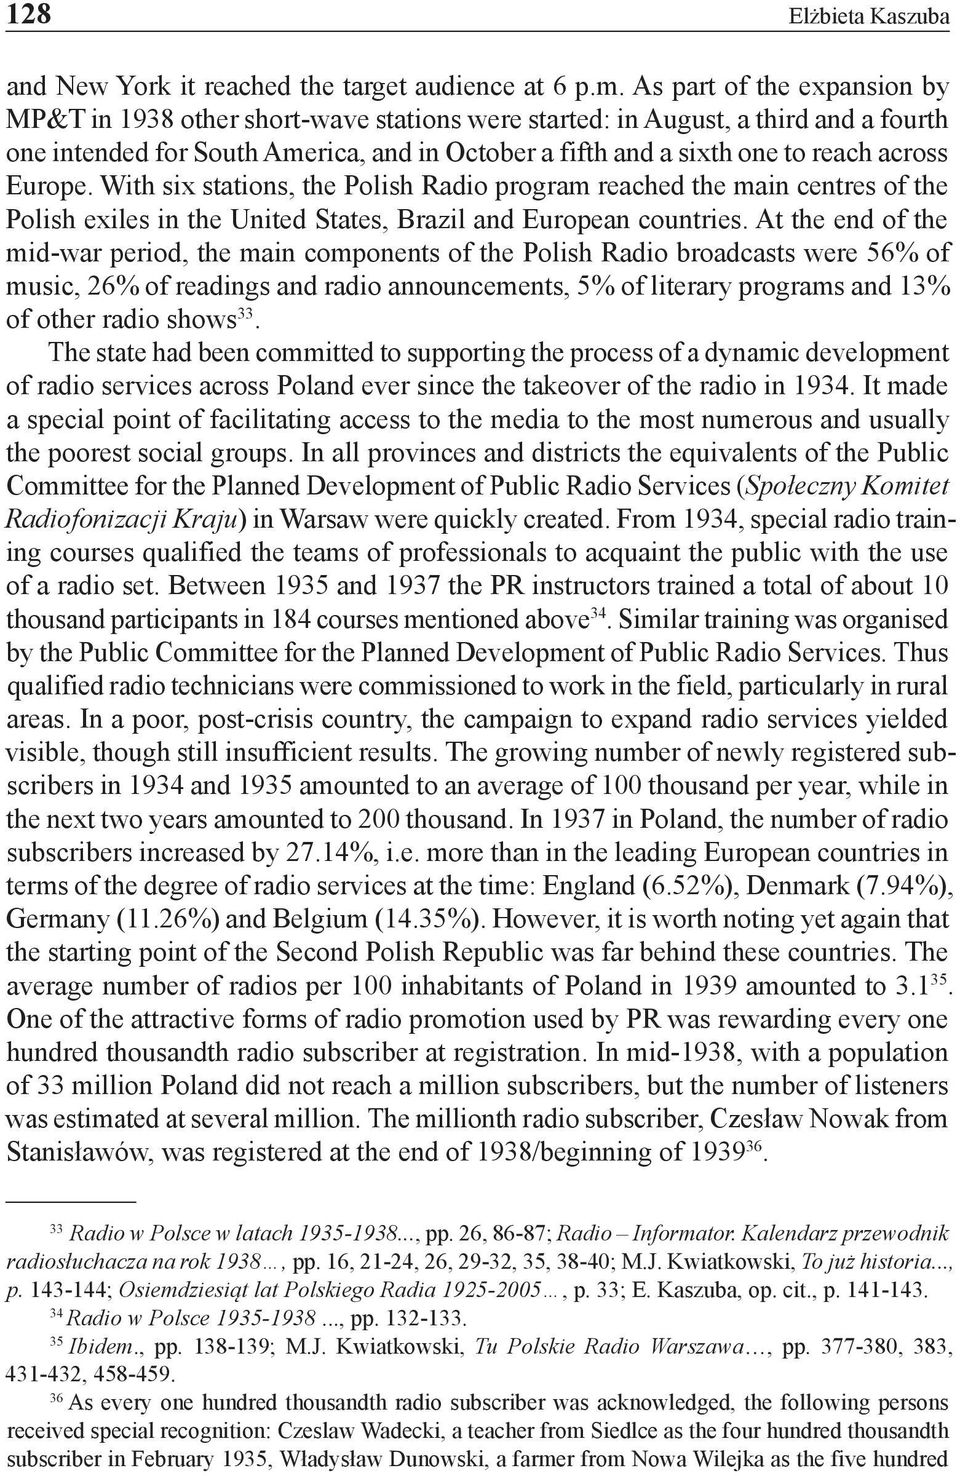 Europe. With six stations, the Polish Radio program reached the main centres of the Polish exiles in the United States, Brazil and European countries.